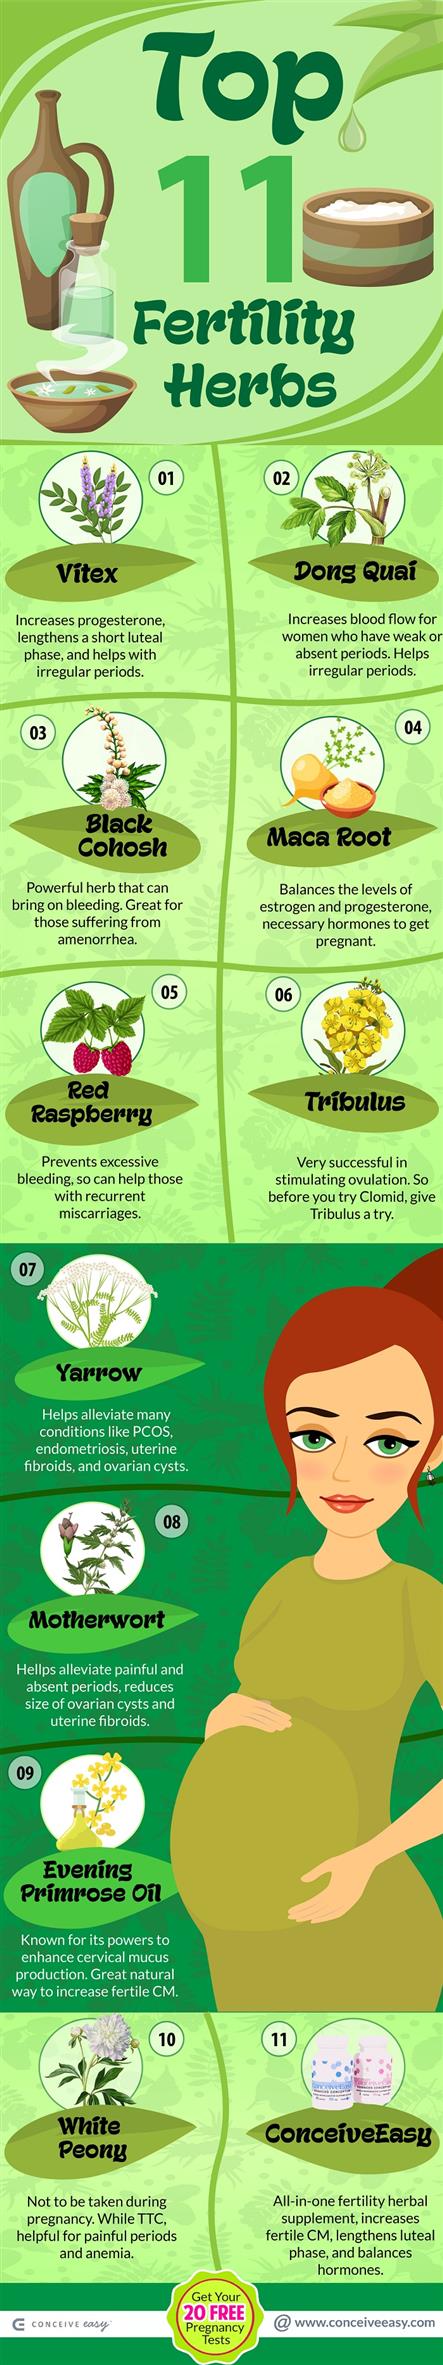 Top 11 Fertility Herbs Infographic